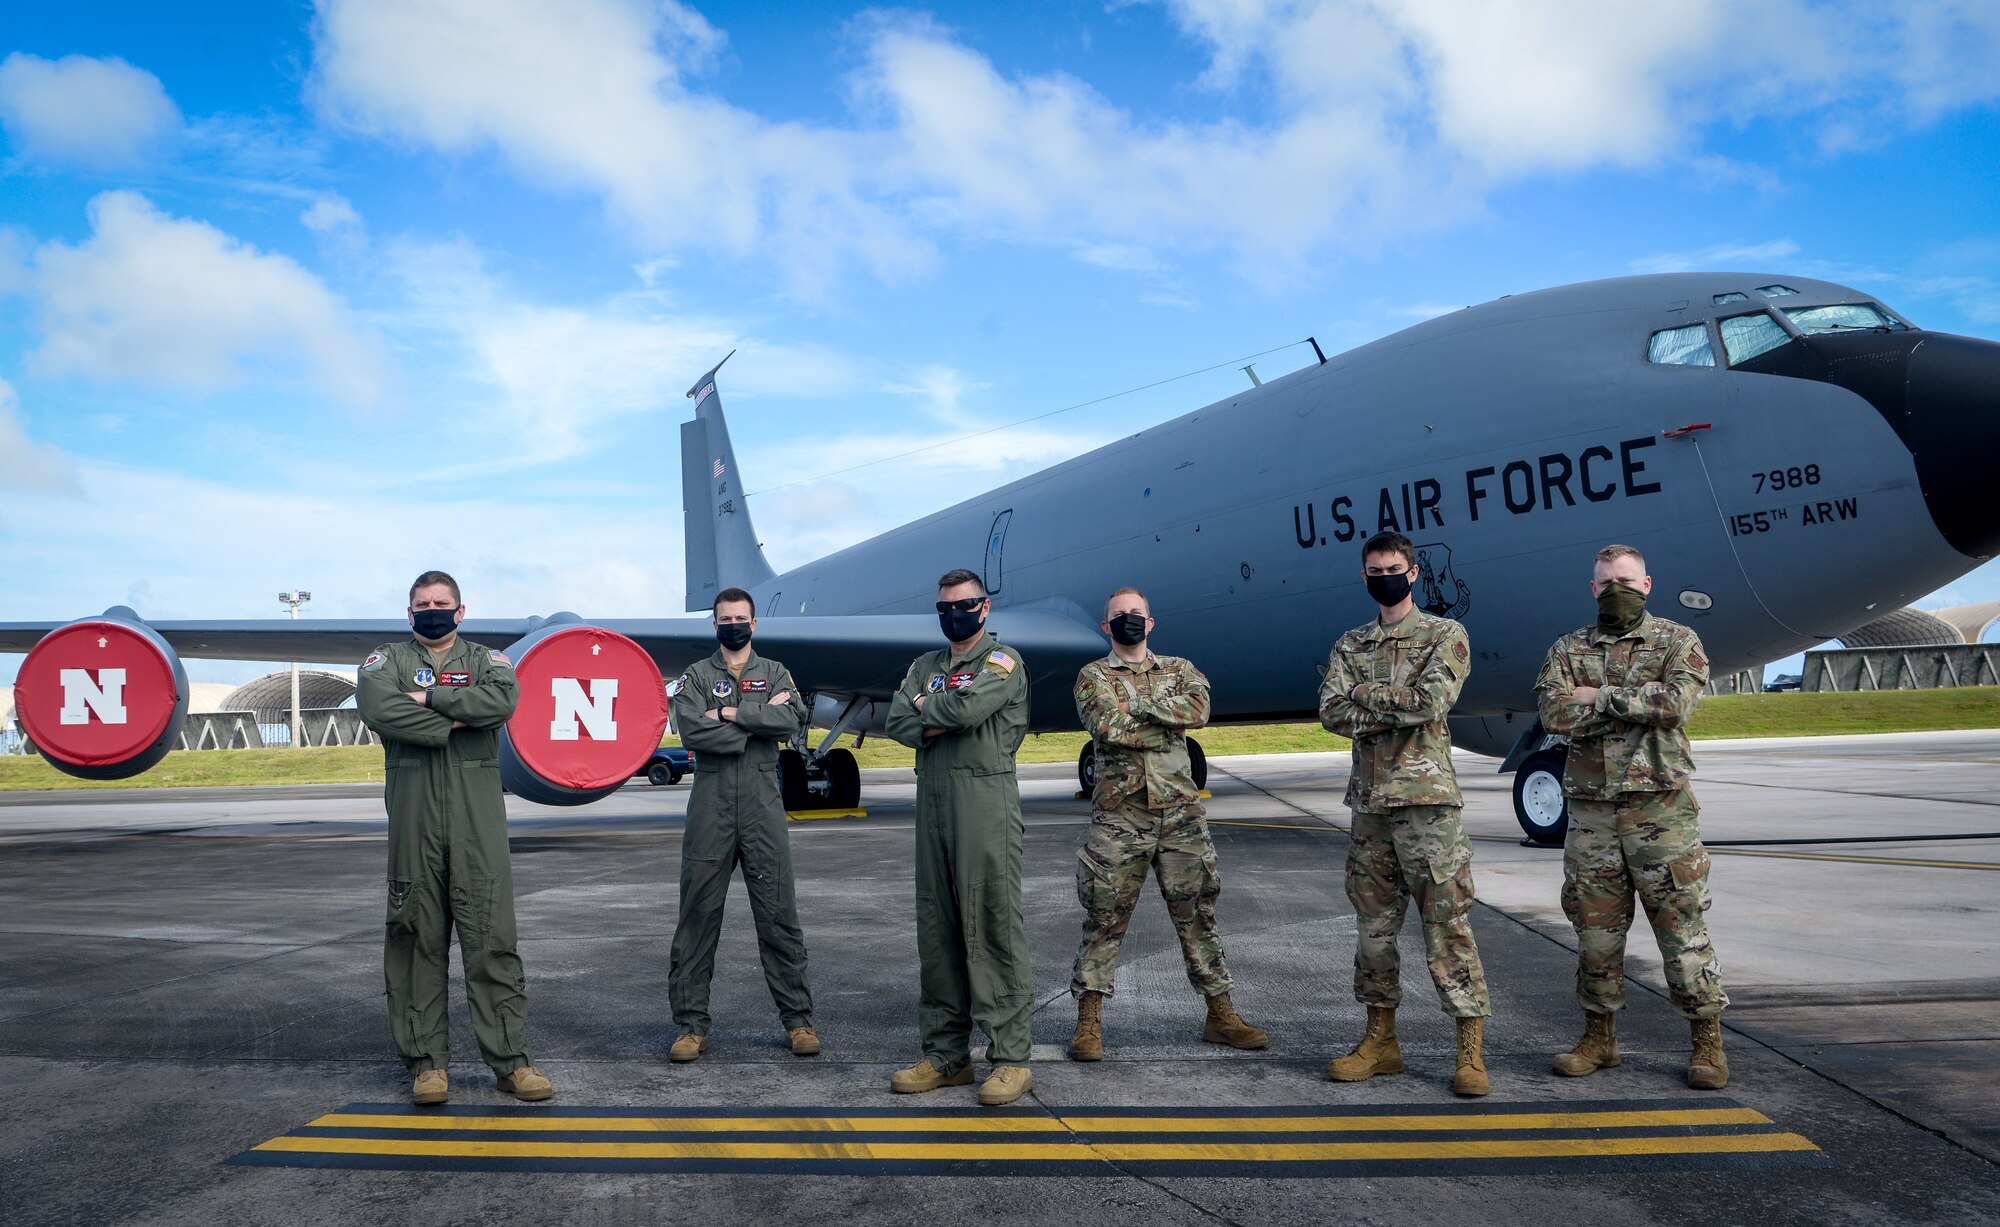 Five U.S. Air Force Guardsmen from the 155th Air Refueling Squadron, Nebraska Air National Guard, and one guardsman from the Alaska ANG, pose for a group photo on Andersen Air Force Base, Guam, Mar. 18, 2021.